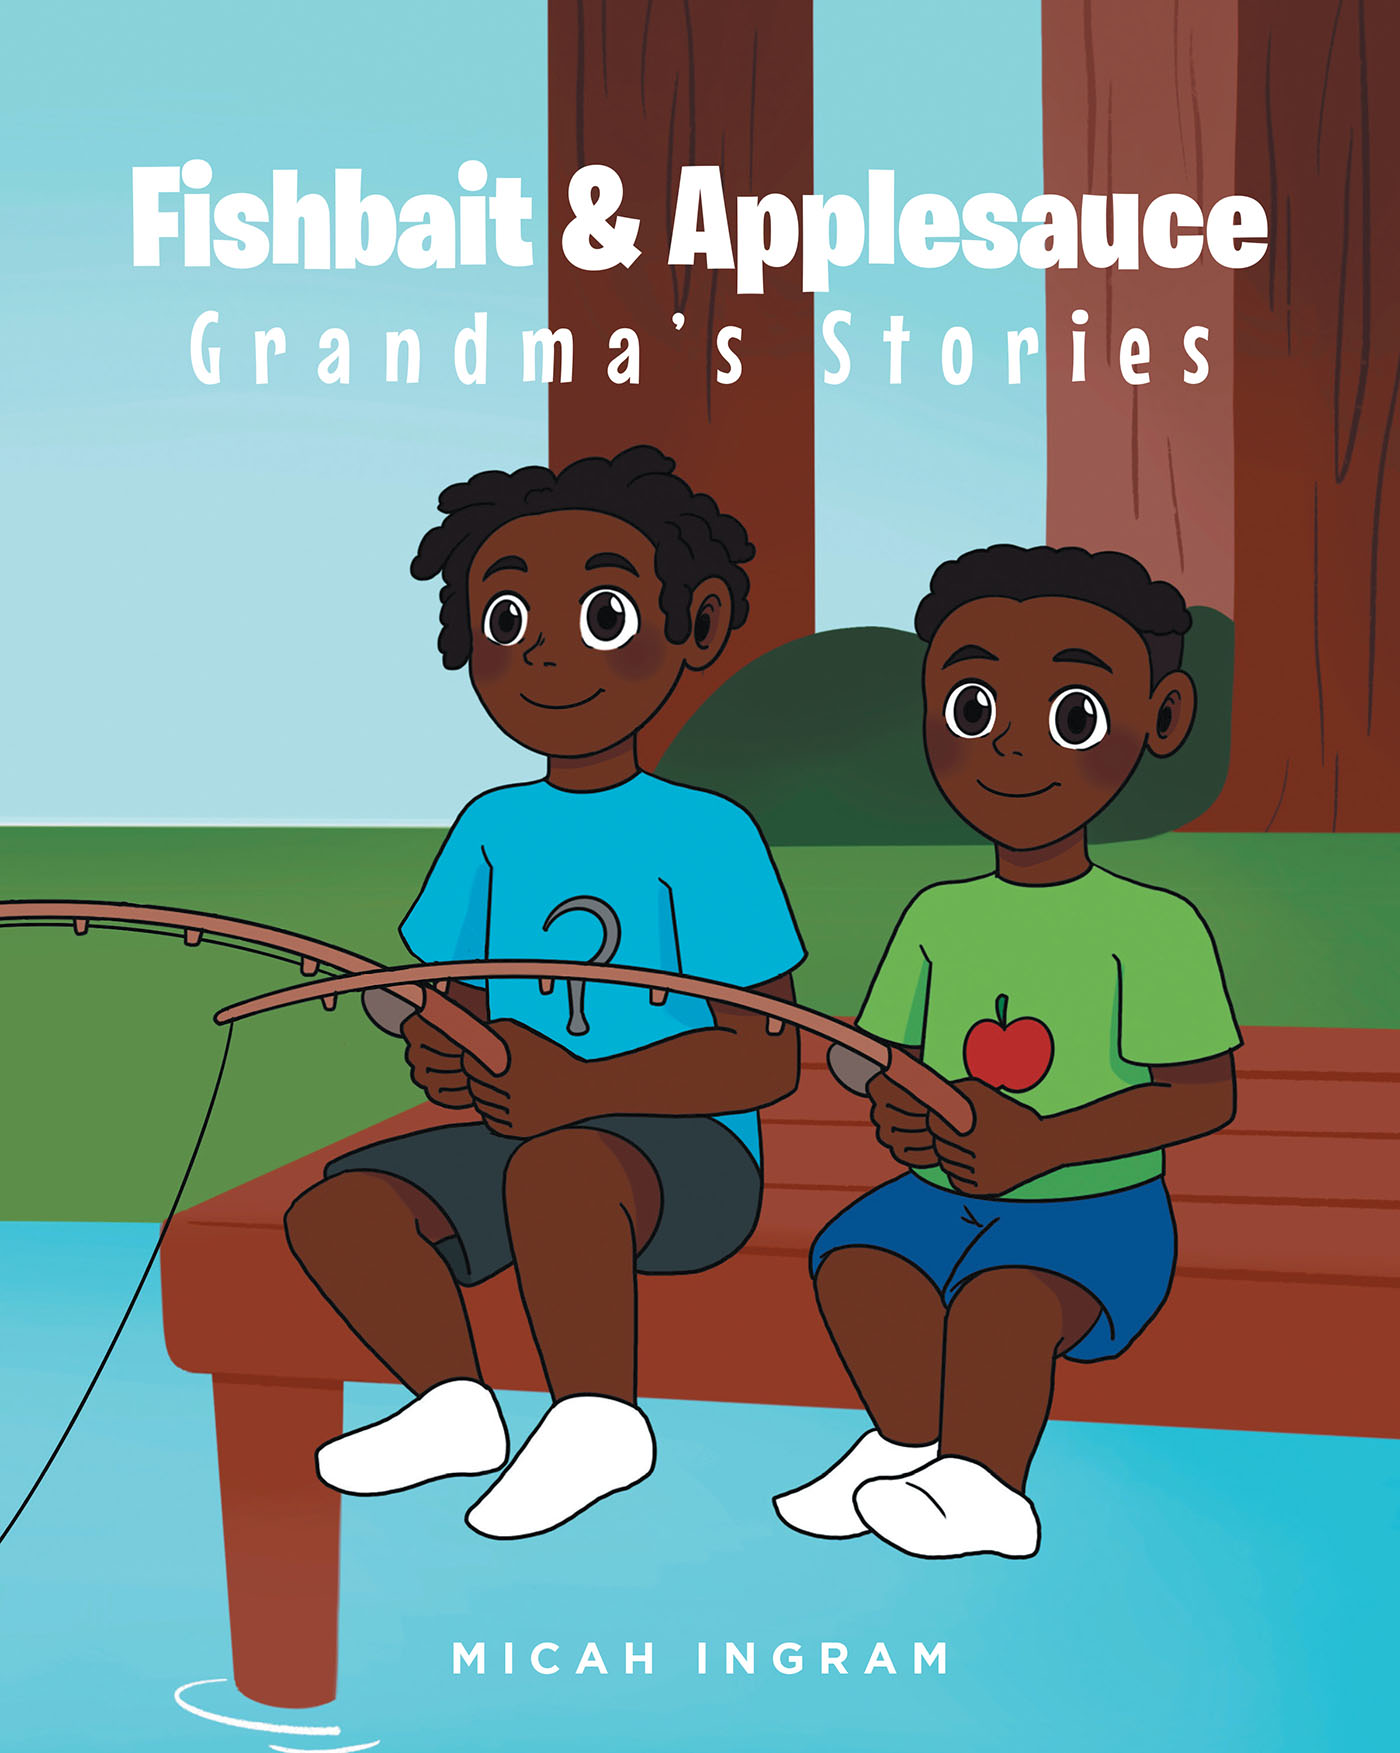 Micah Ingram's New Book, Fishbait & Applesauce: Grandma's Stories,  Explores How a Friendly Competition Between Two Brothers Can Lead to an  Important Life Lesson 